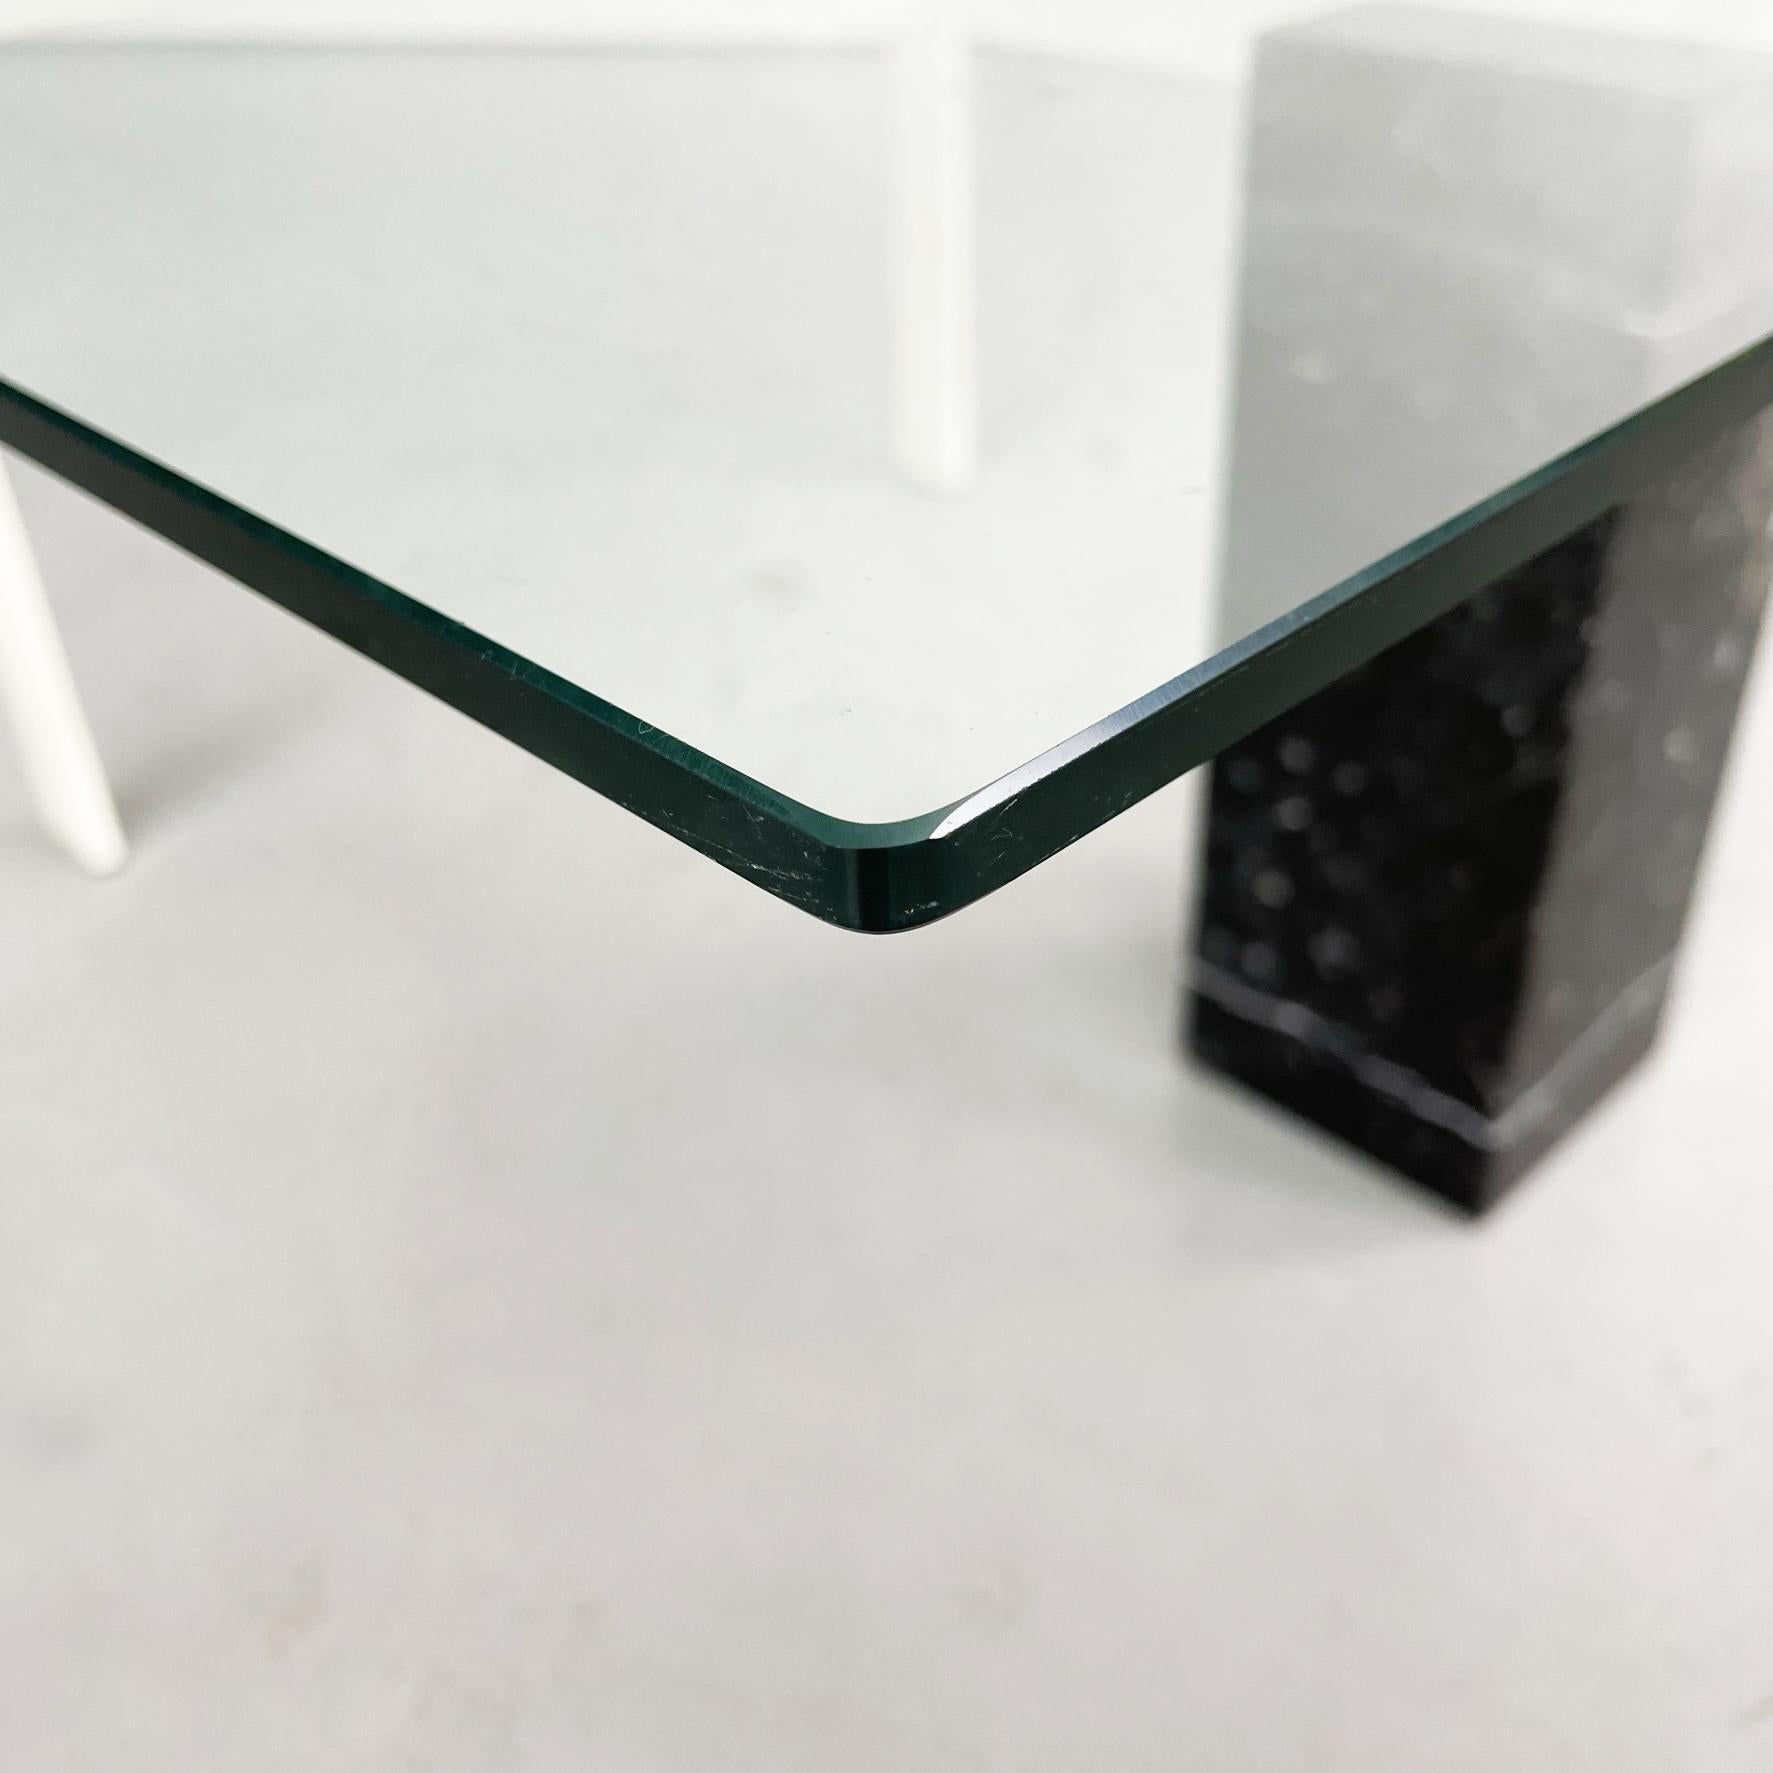 Italian Mid-Century Square Coffee Table Glass, Iron and Marquinia Marble, 1980s For Sale 1